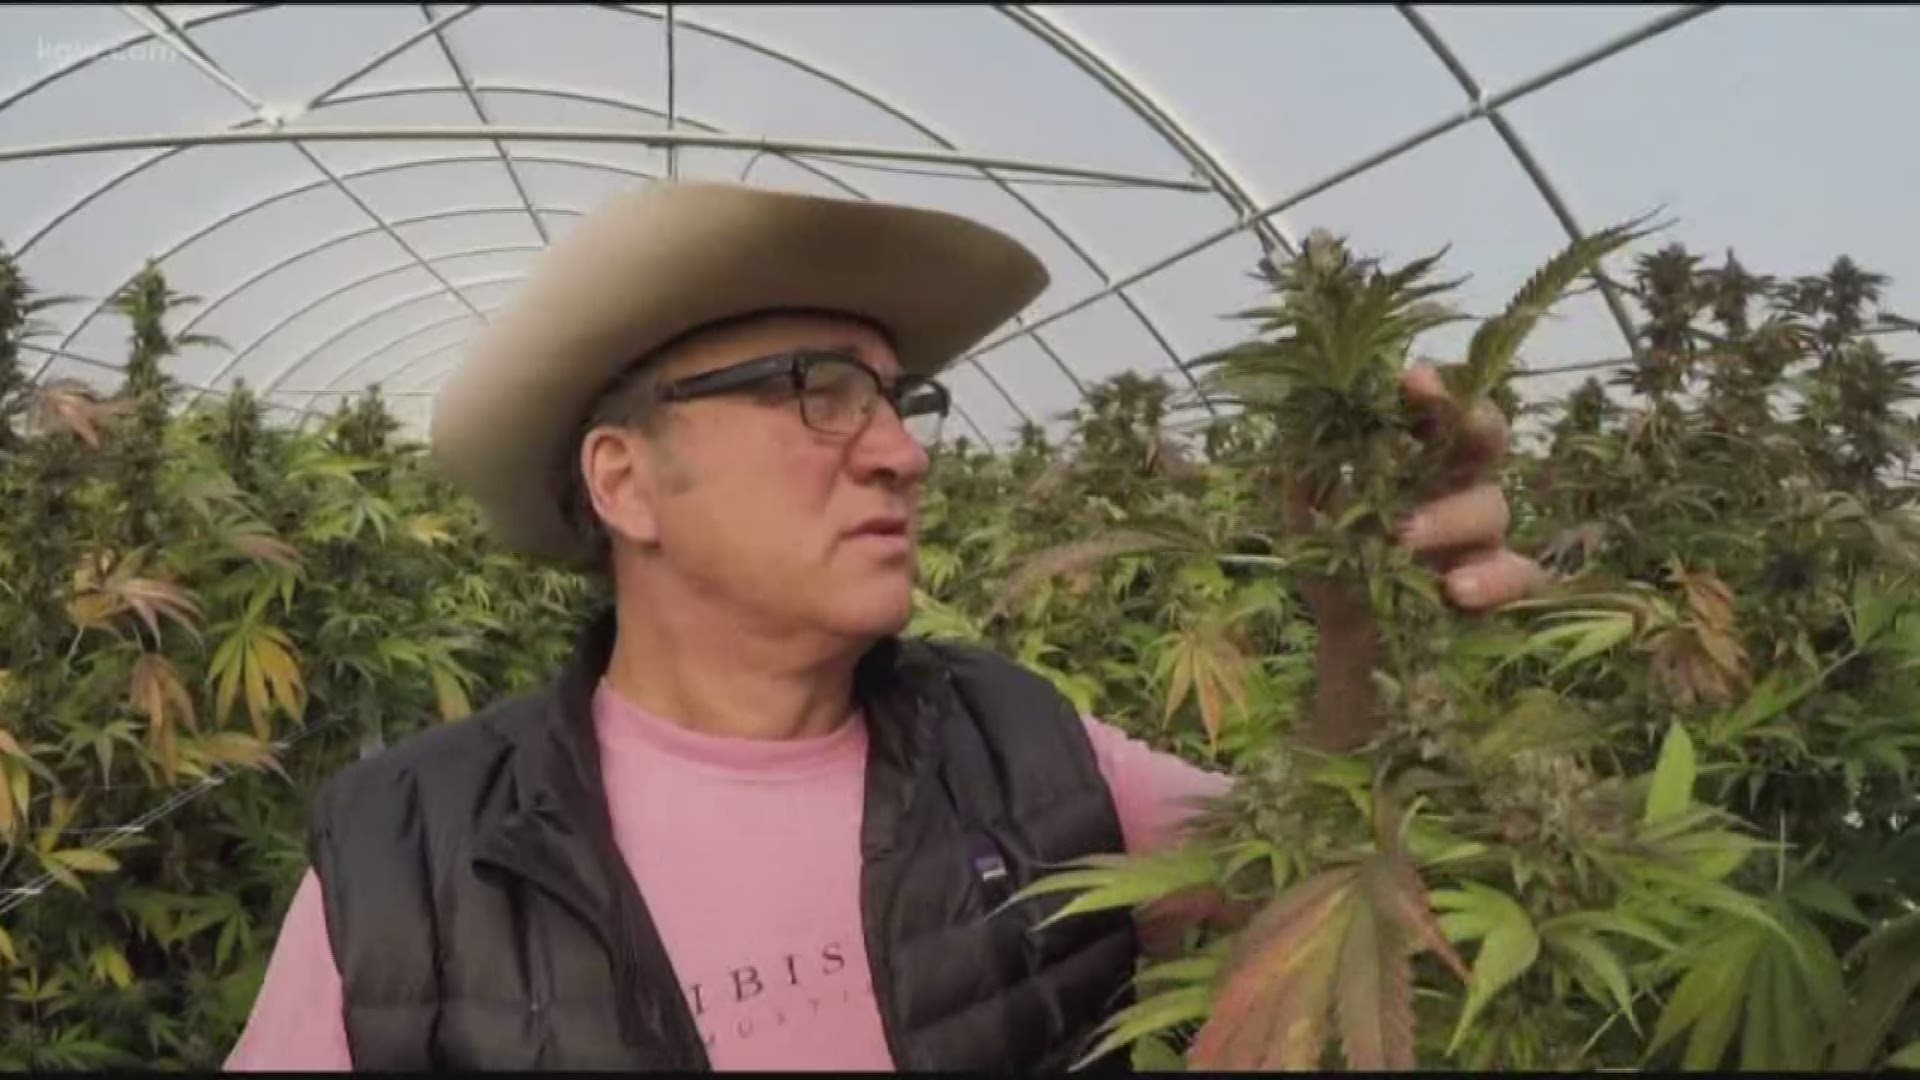 Jim Belushi's grow operation, Belushi's Farm, covers 93 acres in the Southern Oregon town of Eagle Point. It's a place he's grown very fond of and where spends around 10 days of each month.